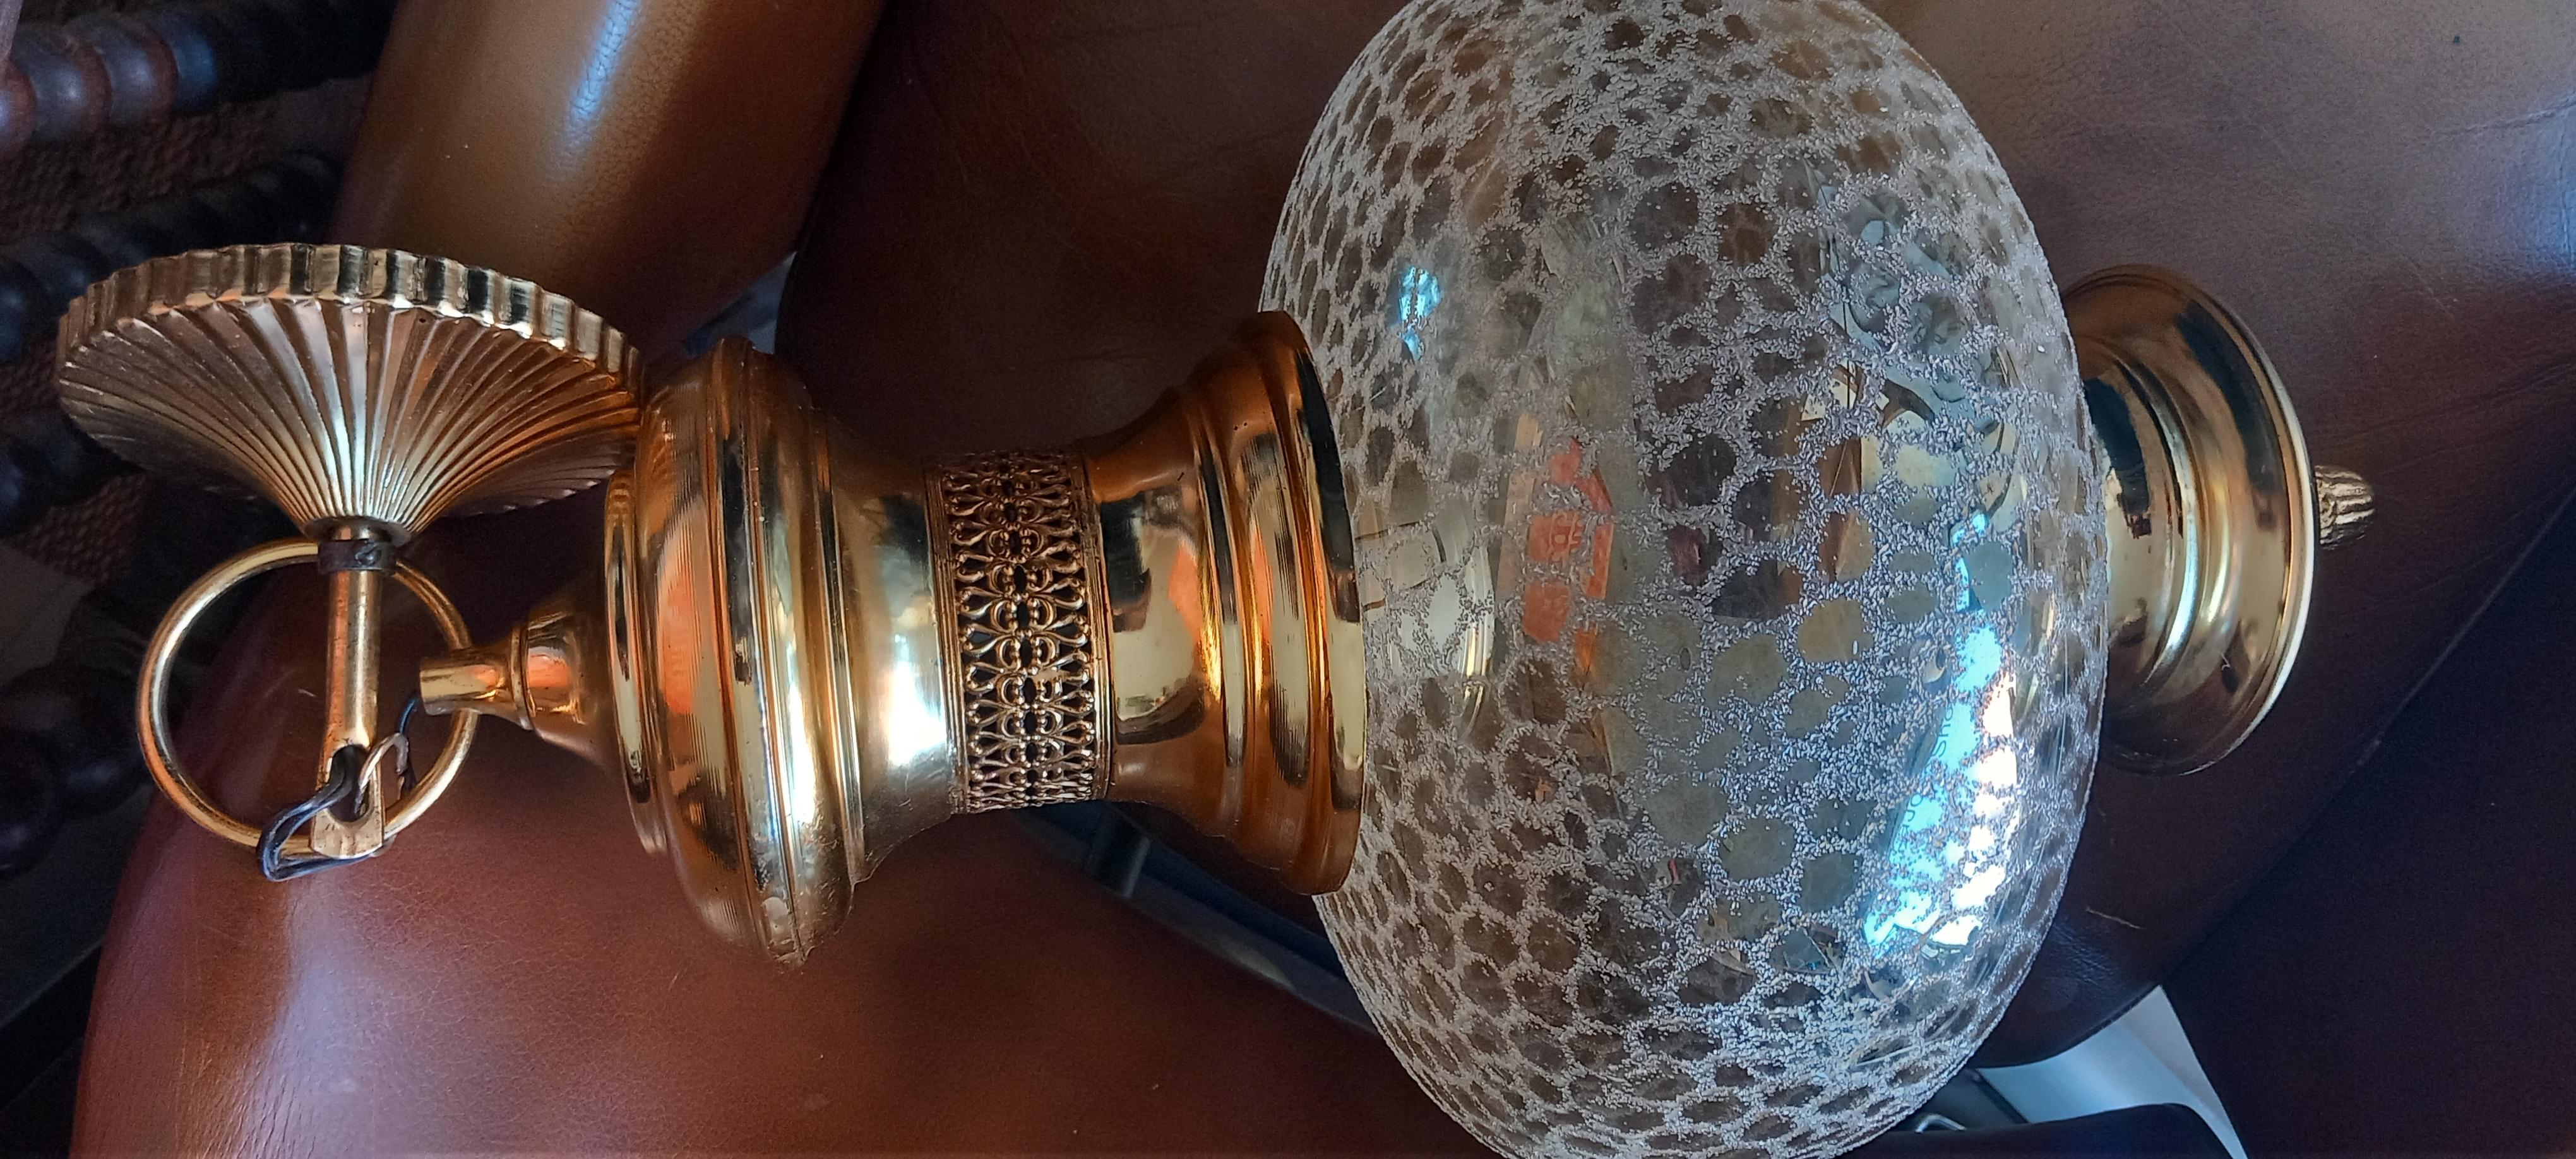 Golden Lamps Lanterns or Pendant  Gold  Brass and Glass, Spain Mid 20th Century For Sale 2